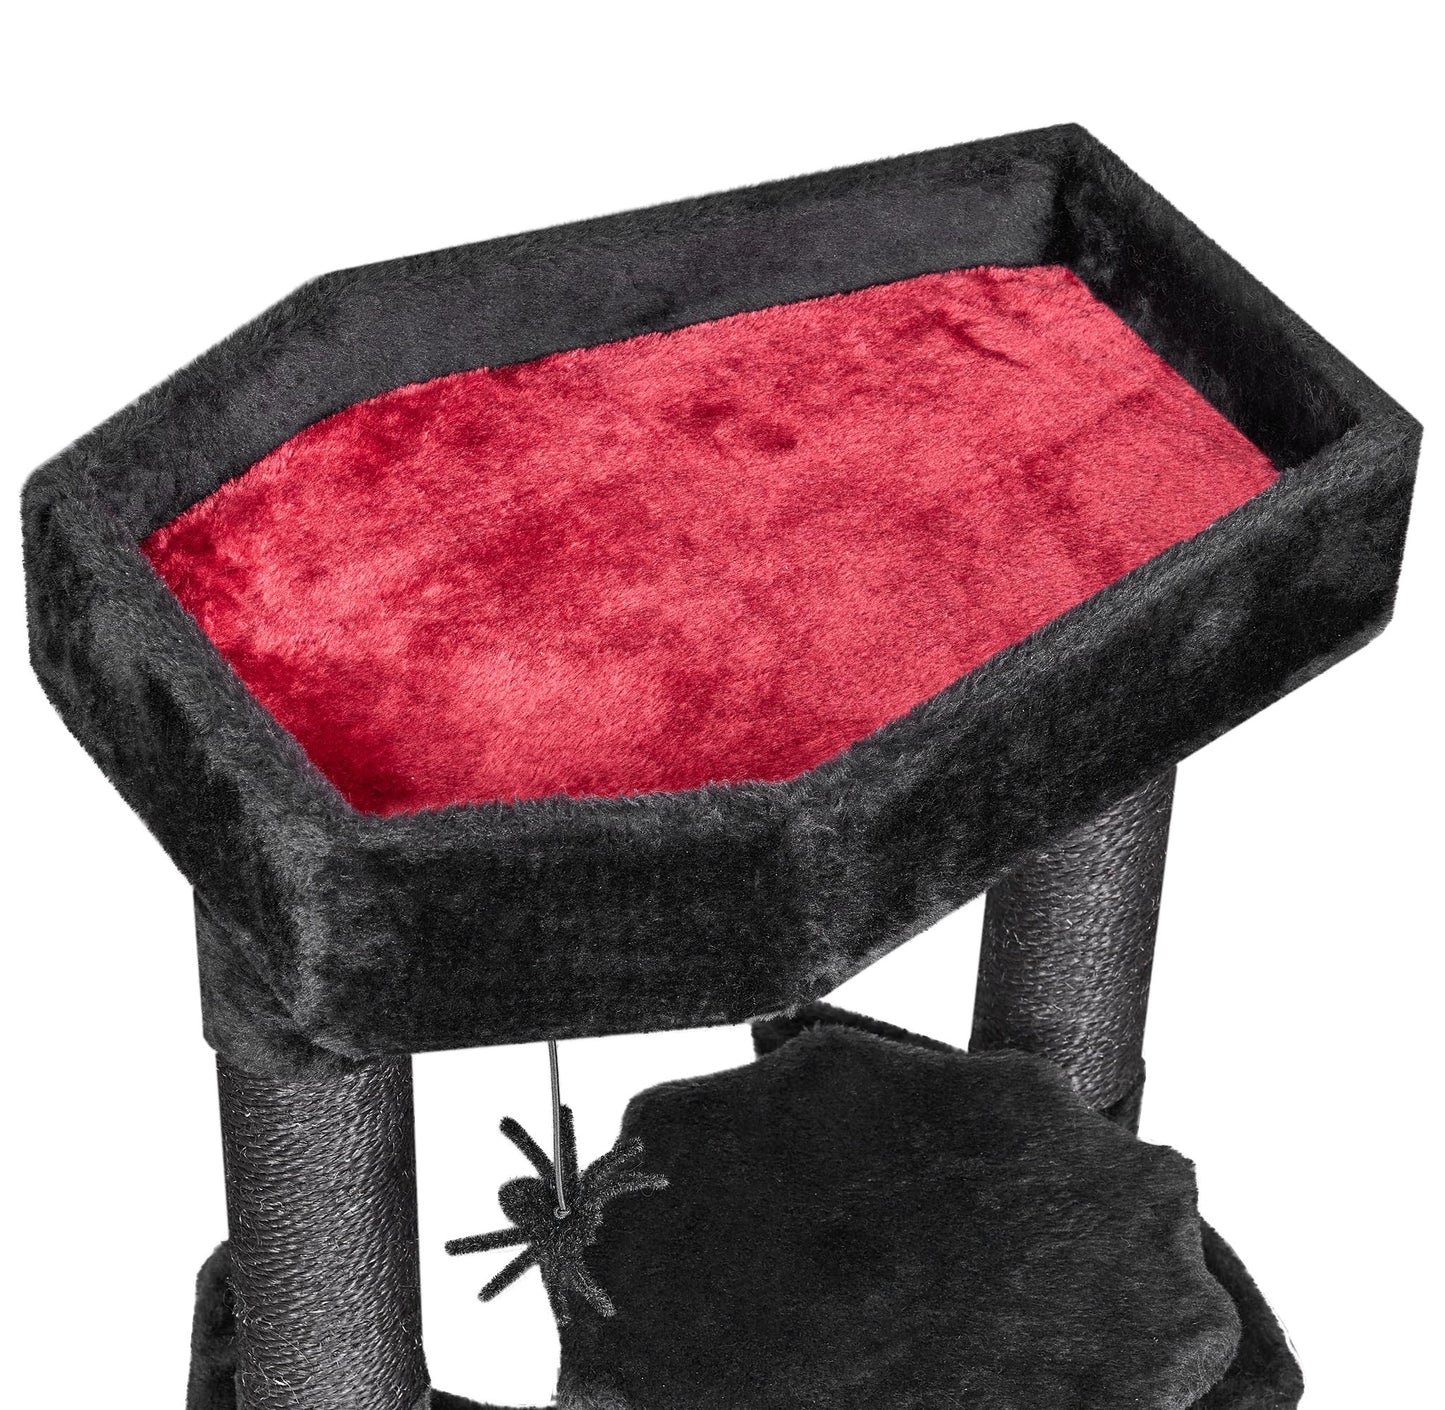 BEWISHOME Gothic Cat Tree - Coffin Bed, Condo, Spider Toy